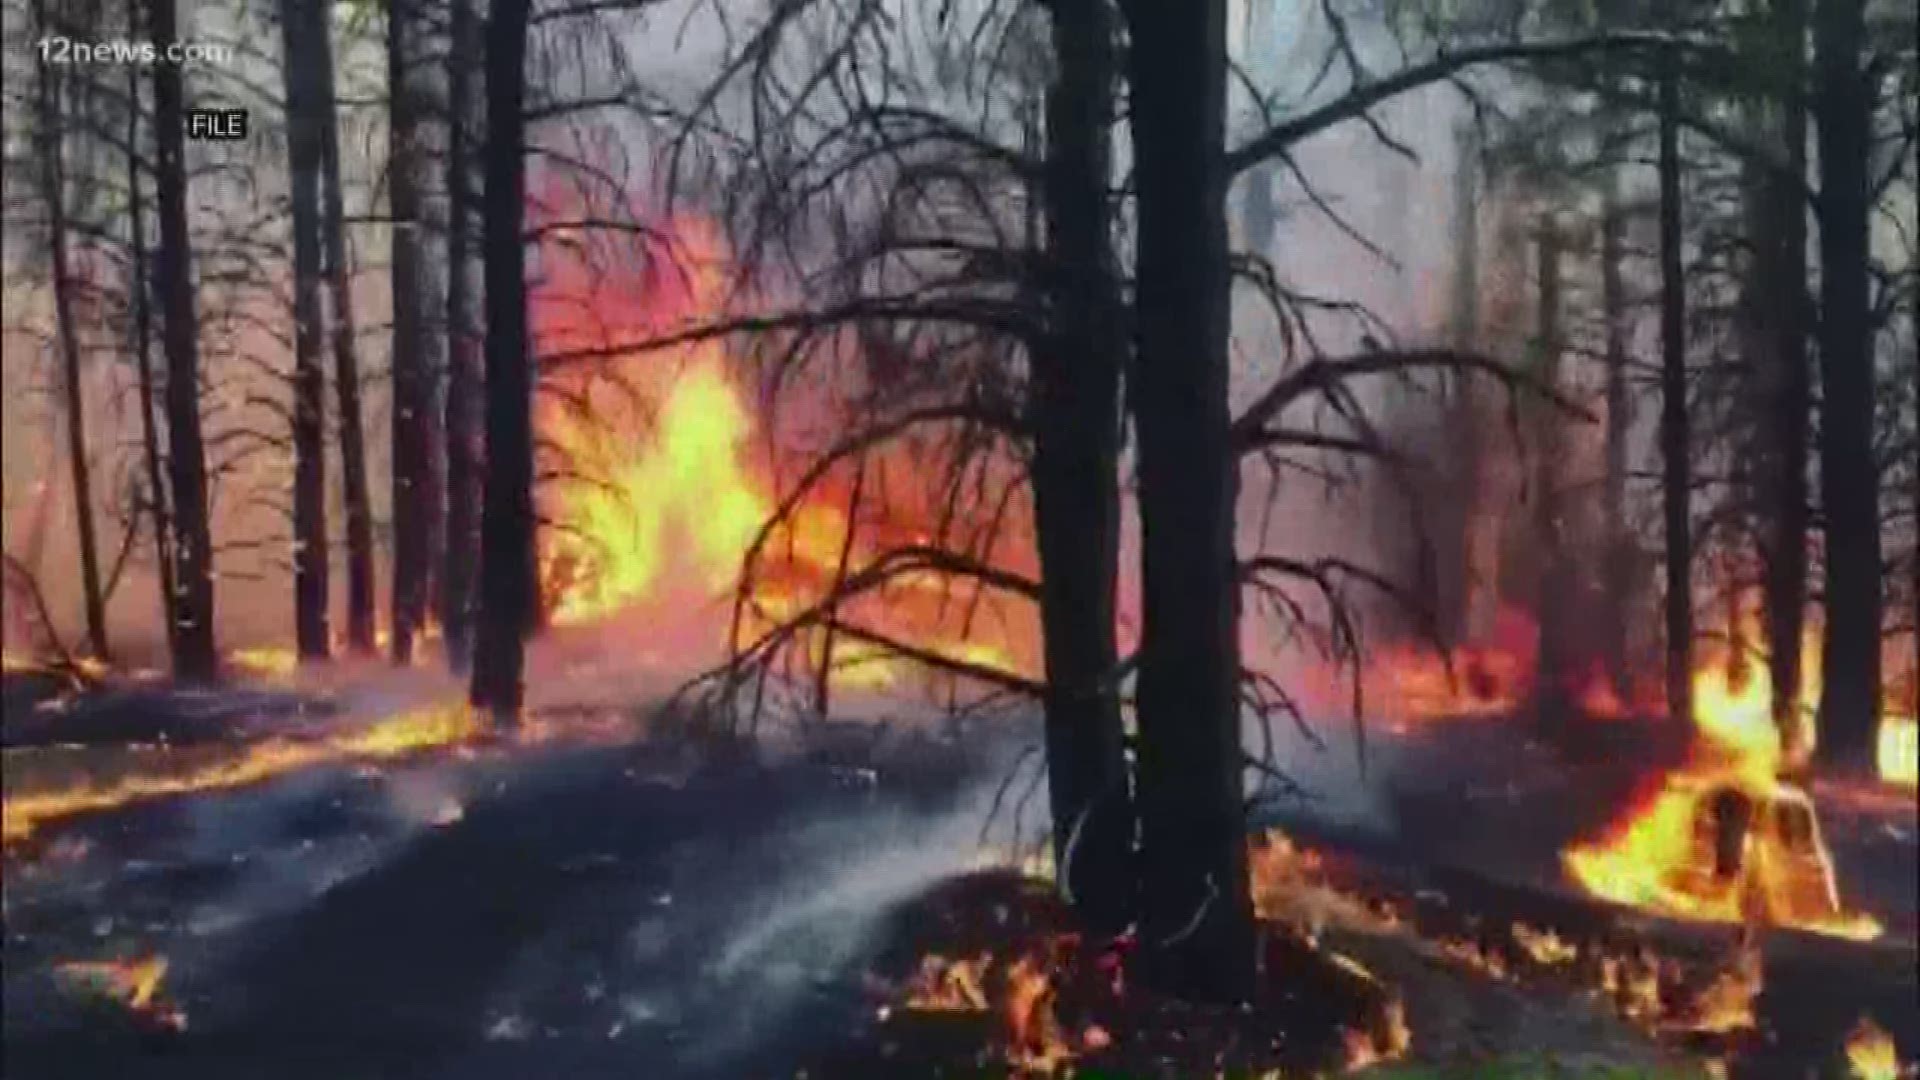 "We will have large fires. Fire is inevitable," BLM spokeswoman Dolores Garcia said.